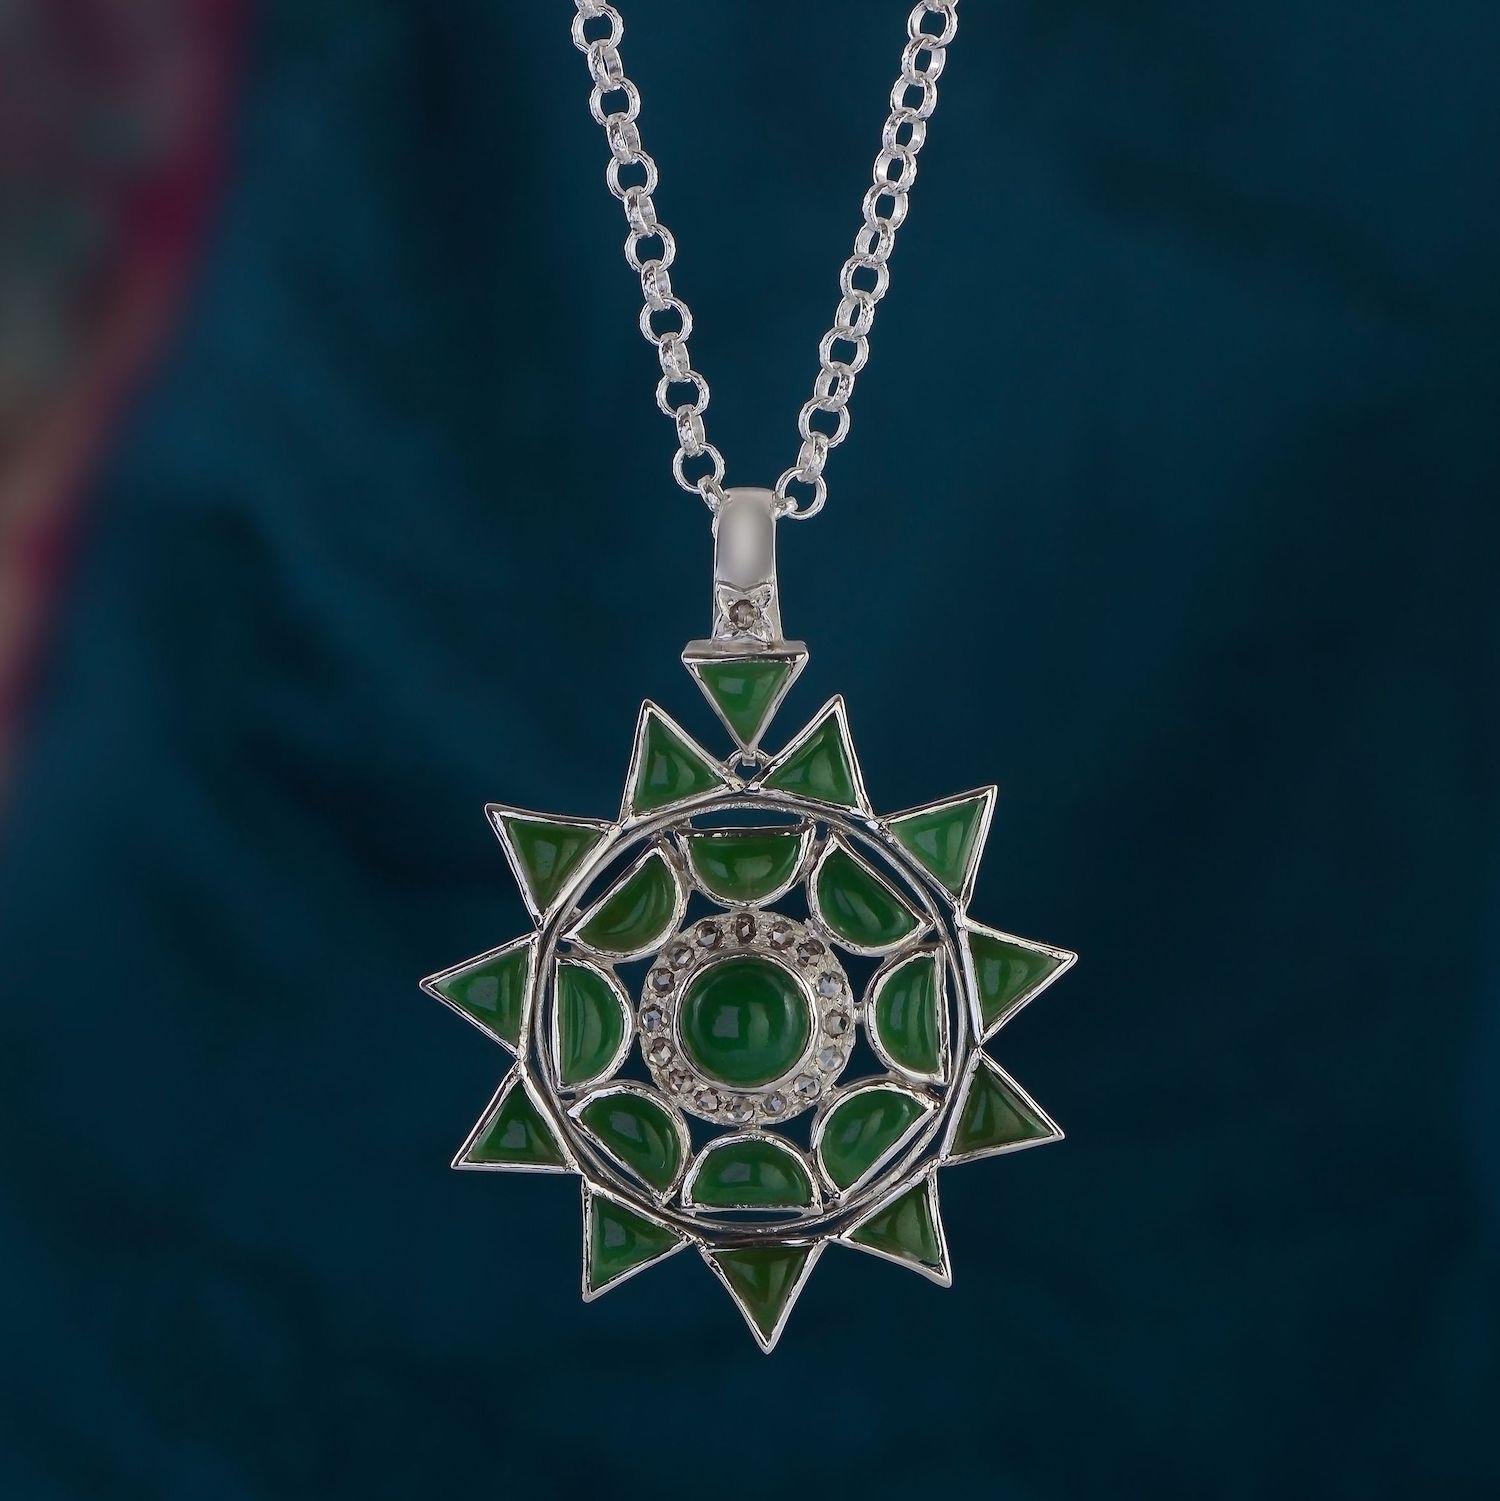 The  Jade Diamond Silver Statement Man's Pendant, has been handmade in our workshops. Made in sterling silver, we have hand cut jade into shapes resembling the sun, moon and stars and embedded it with black diamonds. The pendant comes with a 32 inch